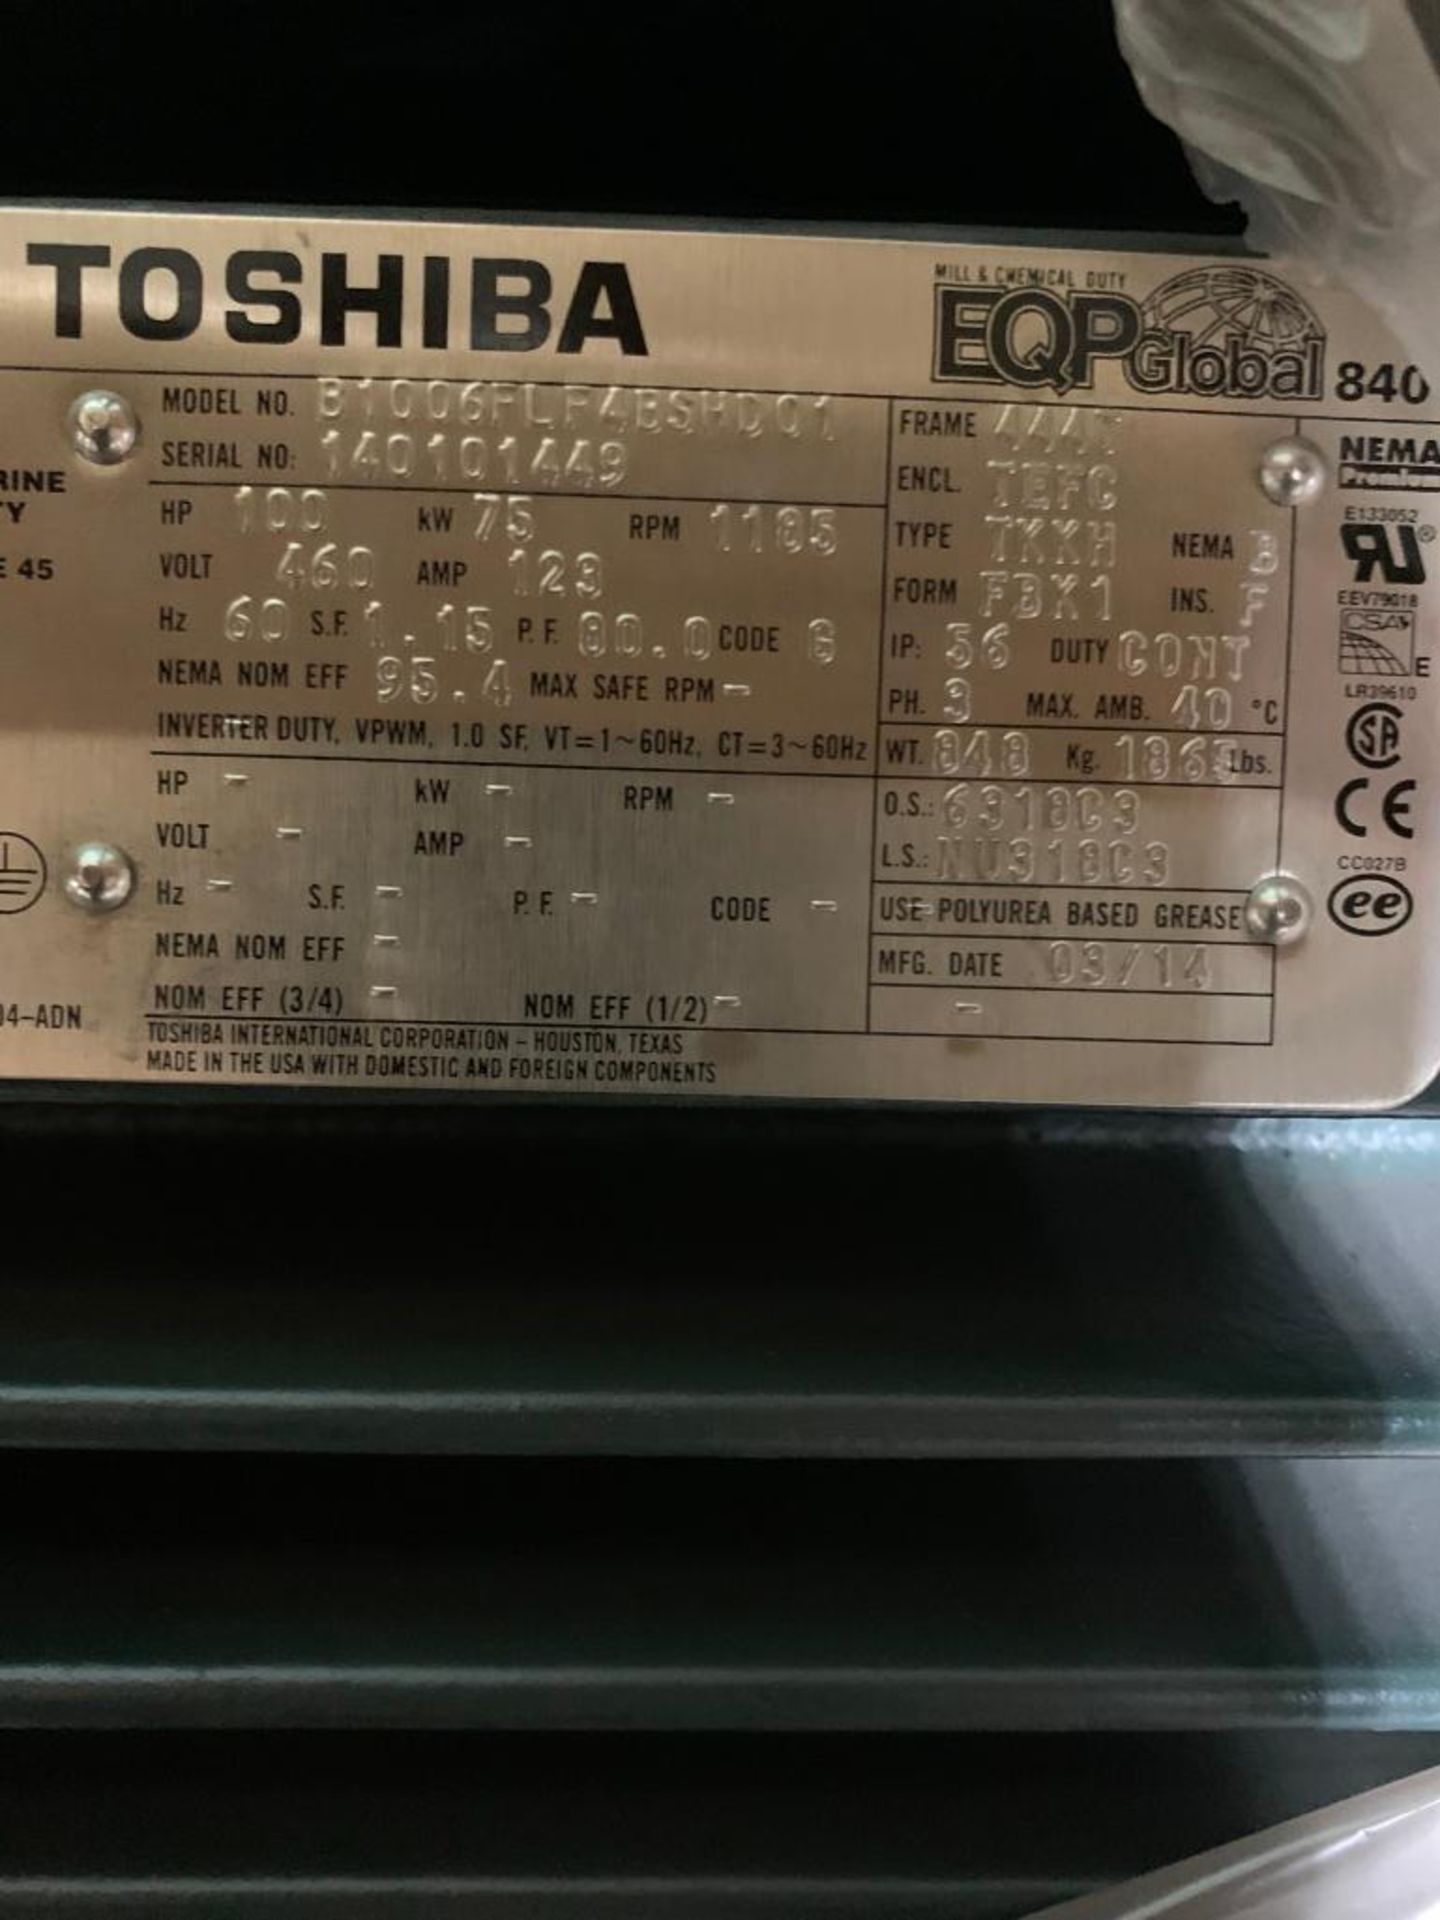 Toshiba 100-HP Electric Motor, 1185 RPM, 460 V, 3 Phase, FR: 444T - Image 3 of 3